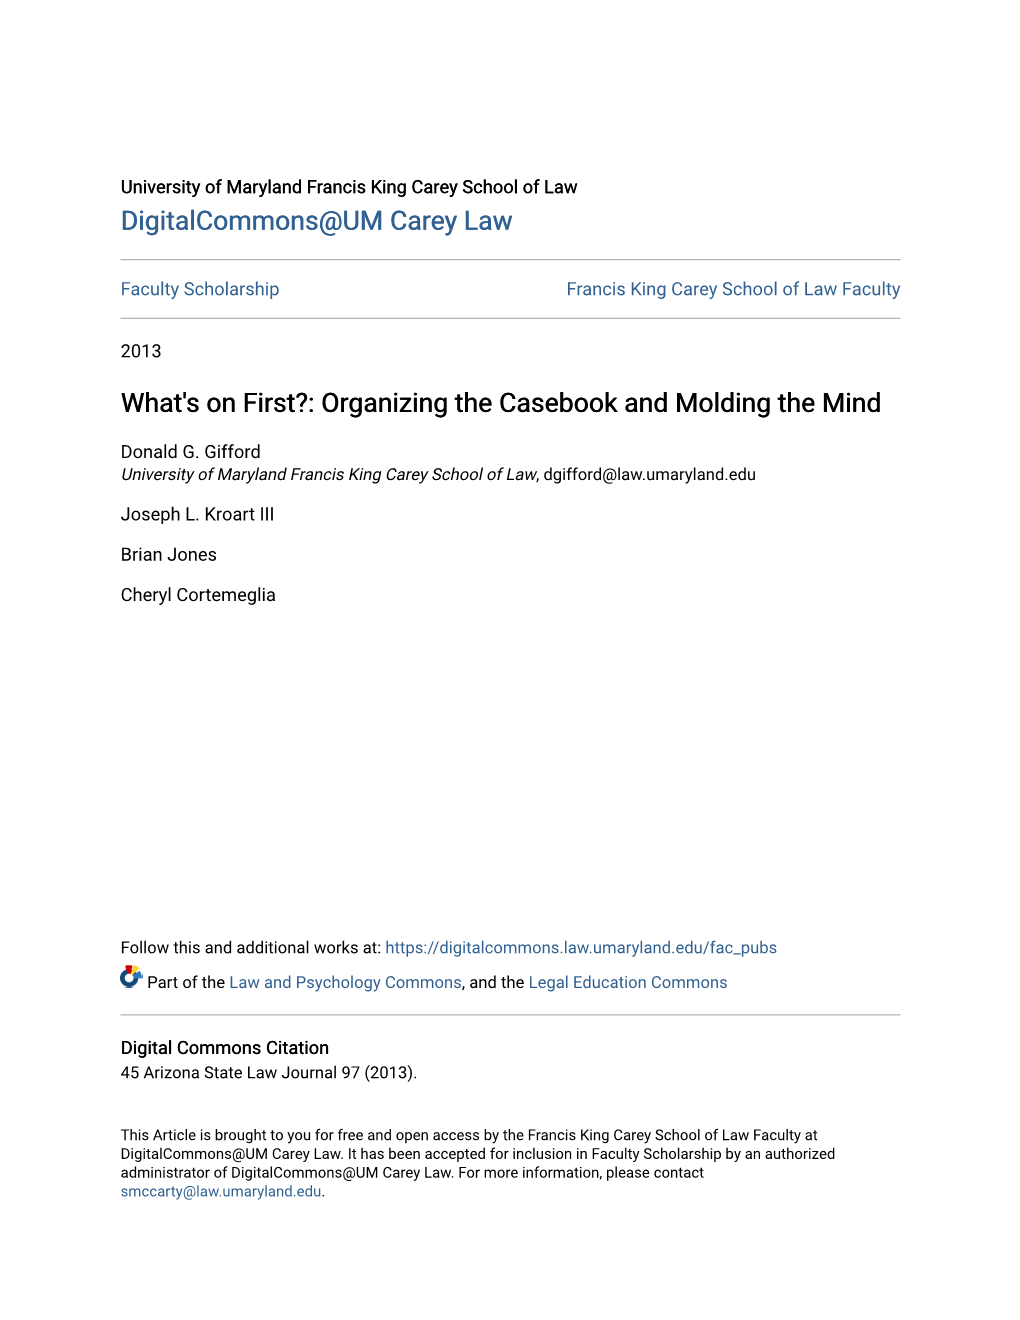 What's on First?: Organizing the Casebook and Molding the Mind